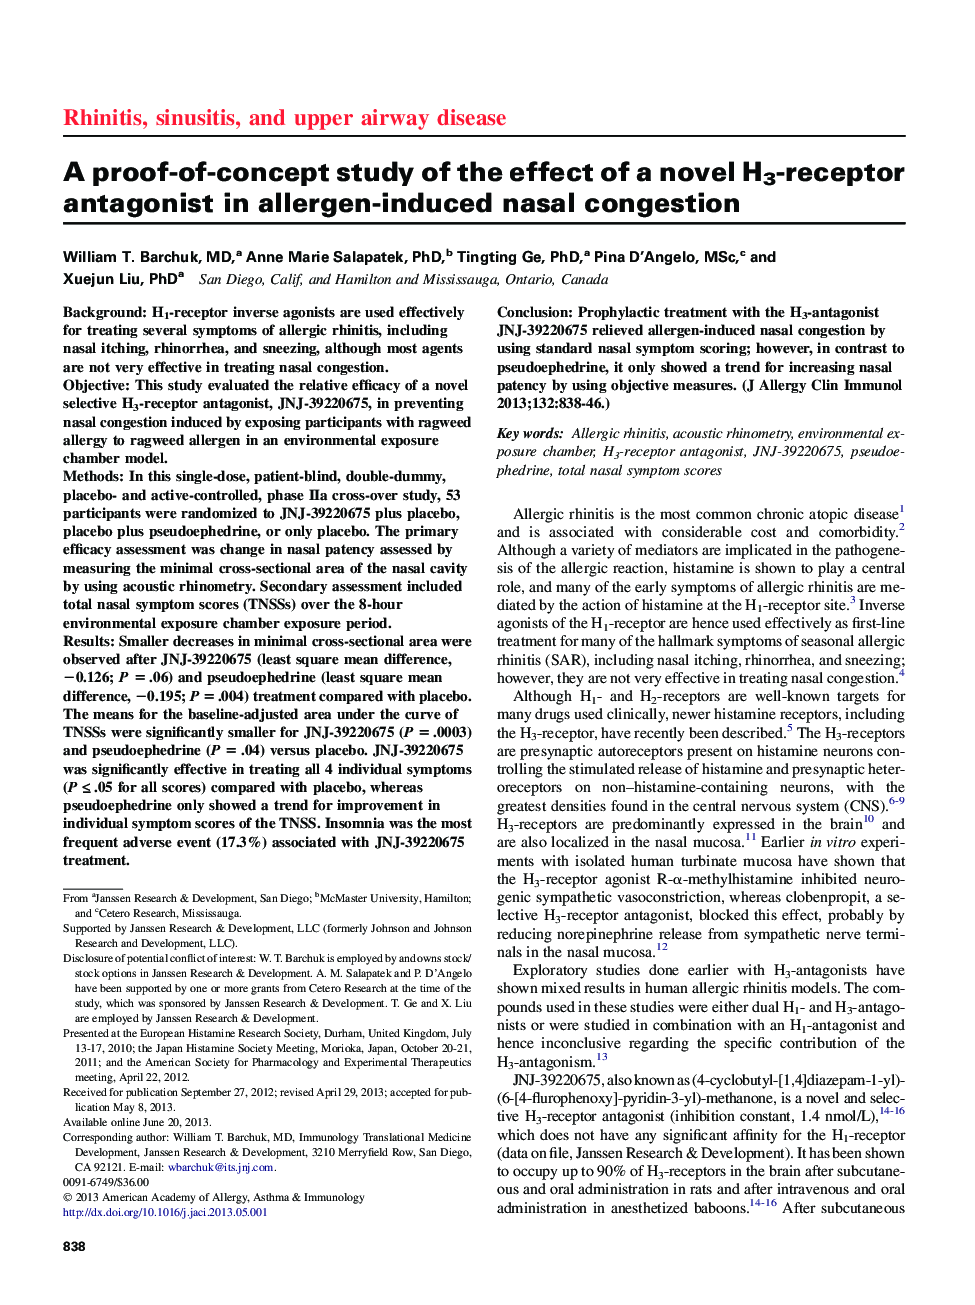 A proof-of-concept study of the effect of a novel H3-receptor antagonist in allergen-induced nasal congestion